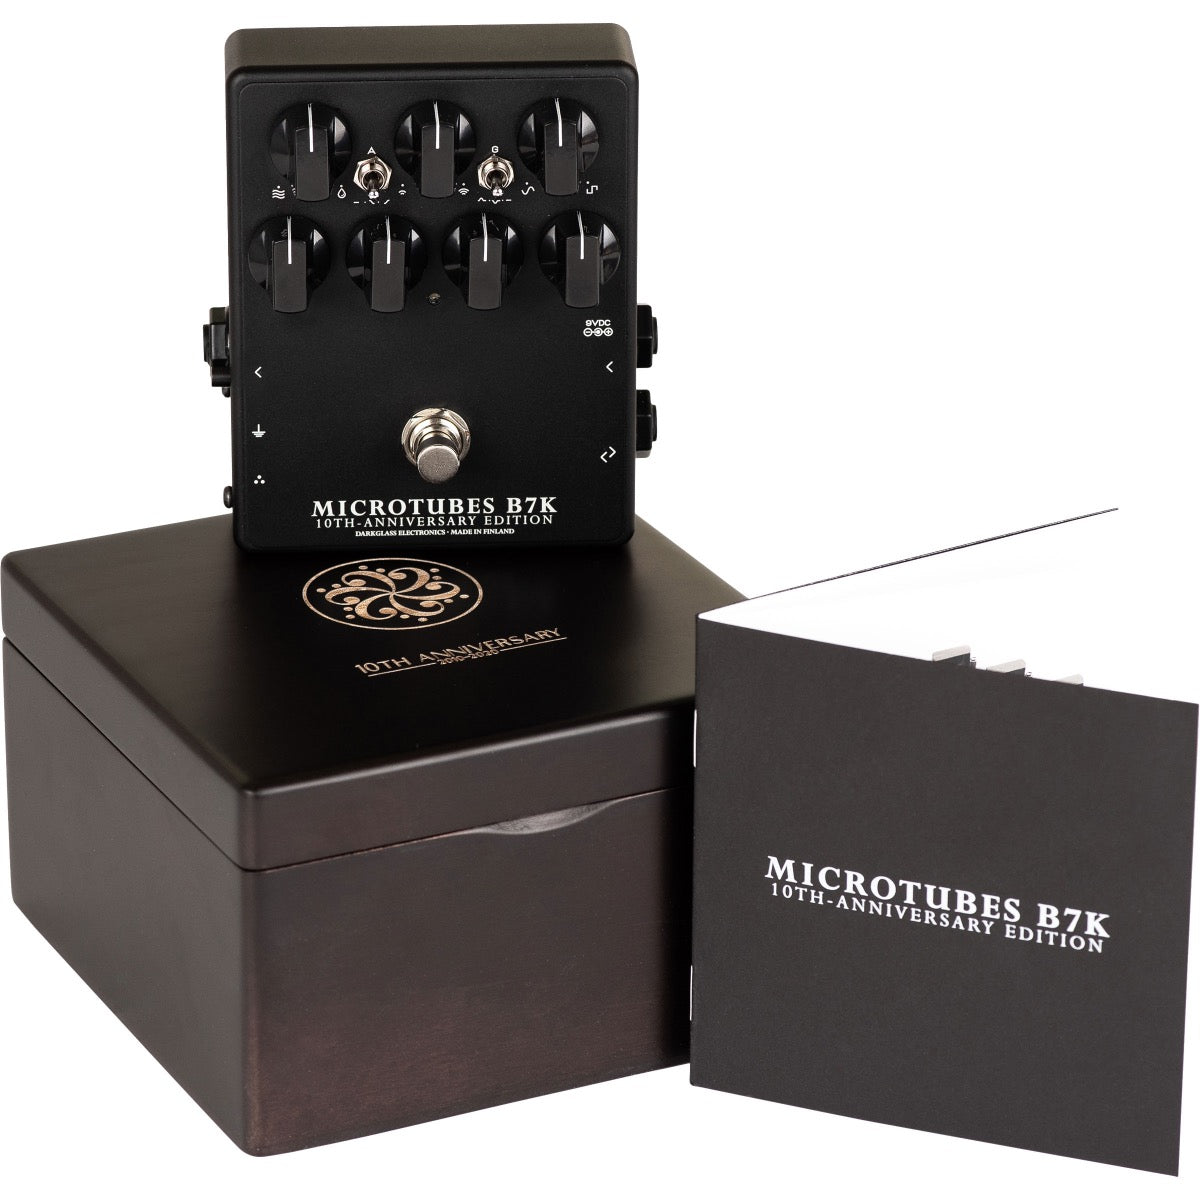 3/4 view of Darkglass Microtubes B7K 10th Anniversary pedal, commemorative box and booklet